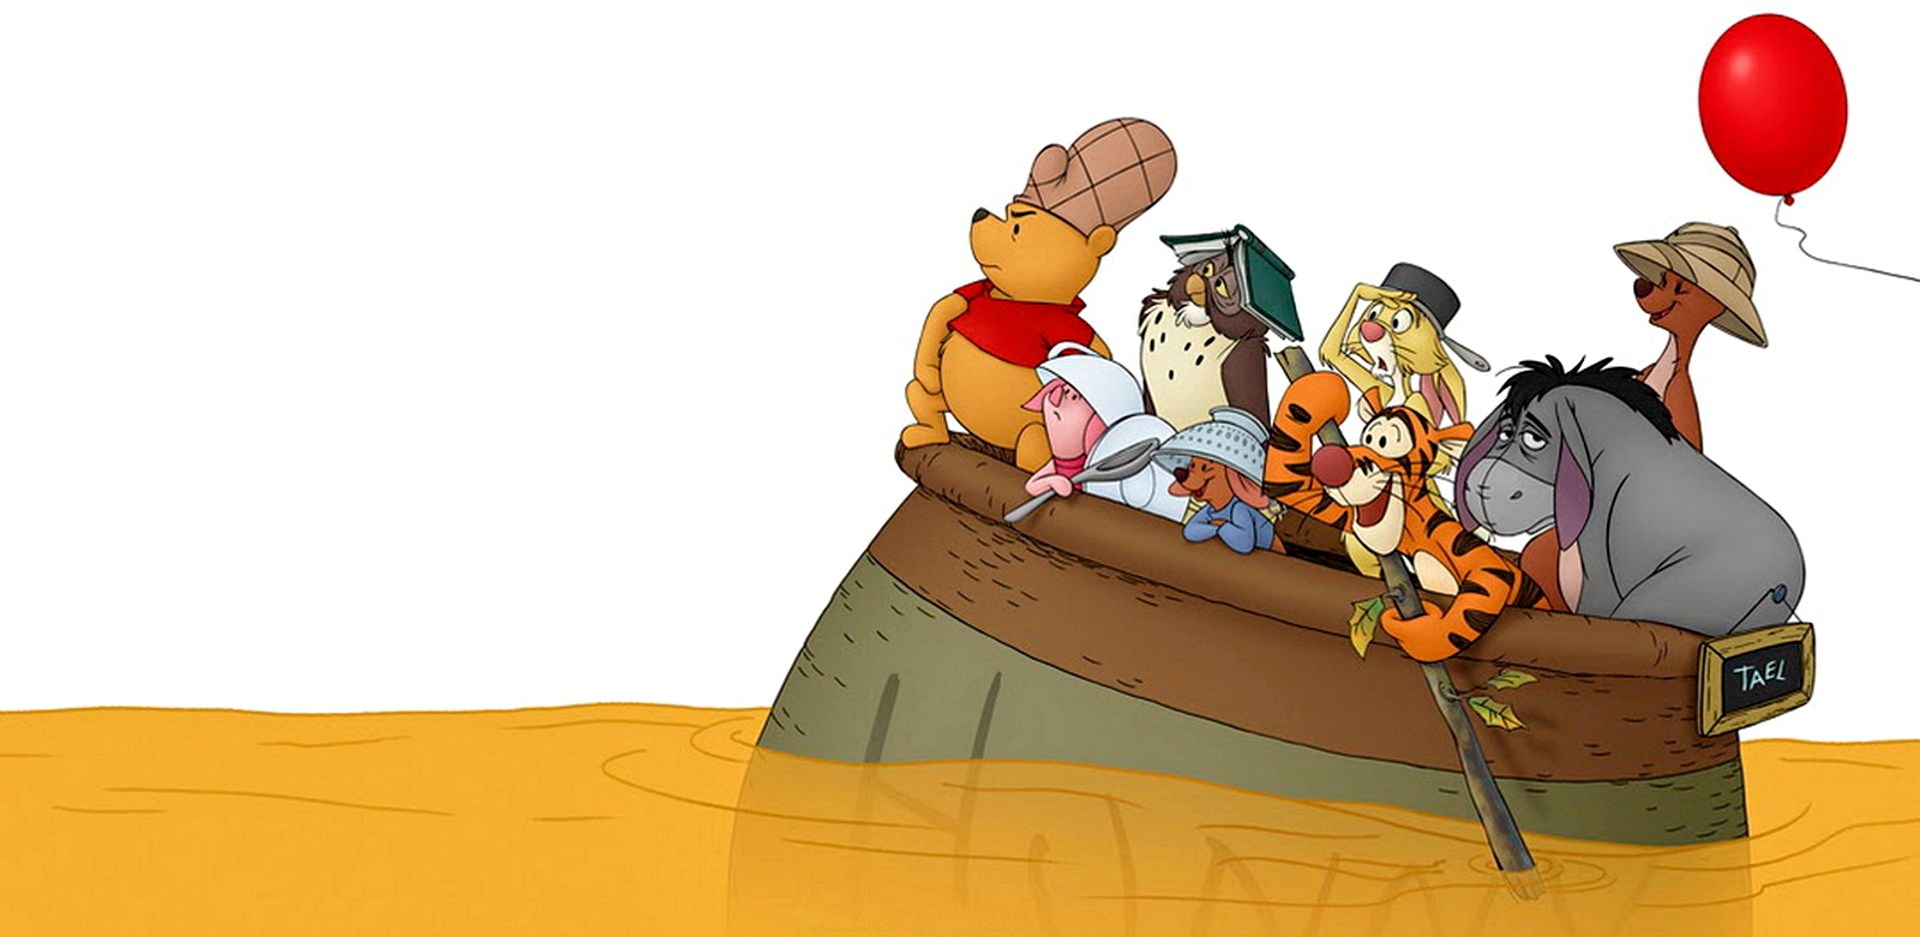 Review: 2011’s Winnie the Pooh a Wonderfully Whimsical New Classic